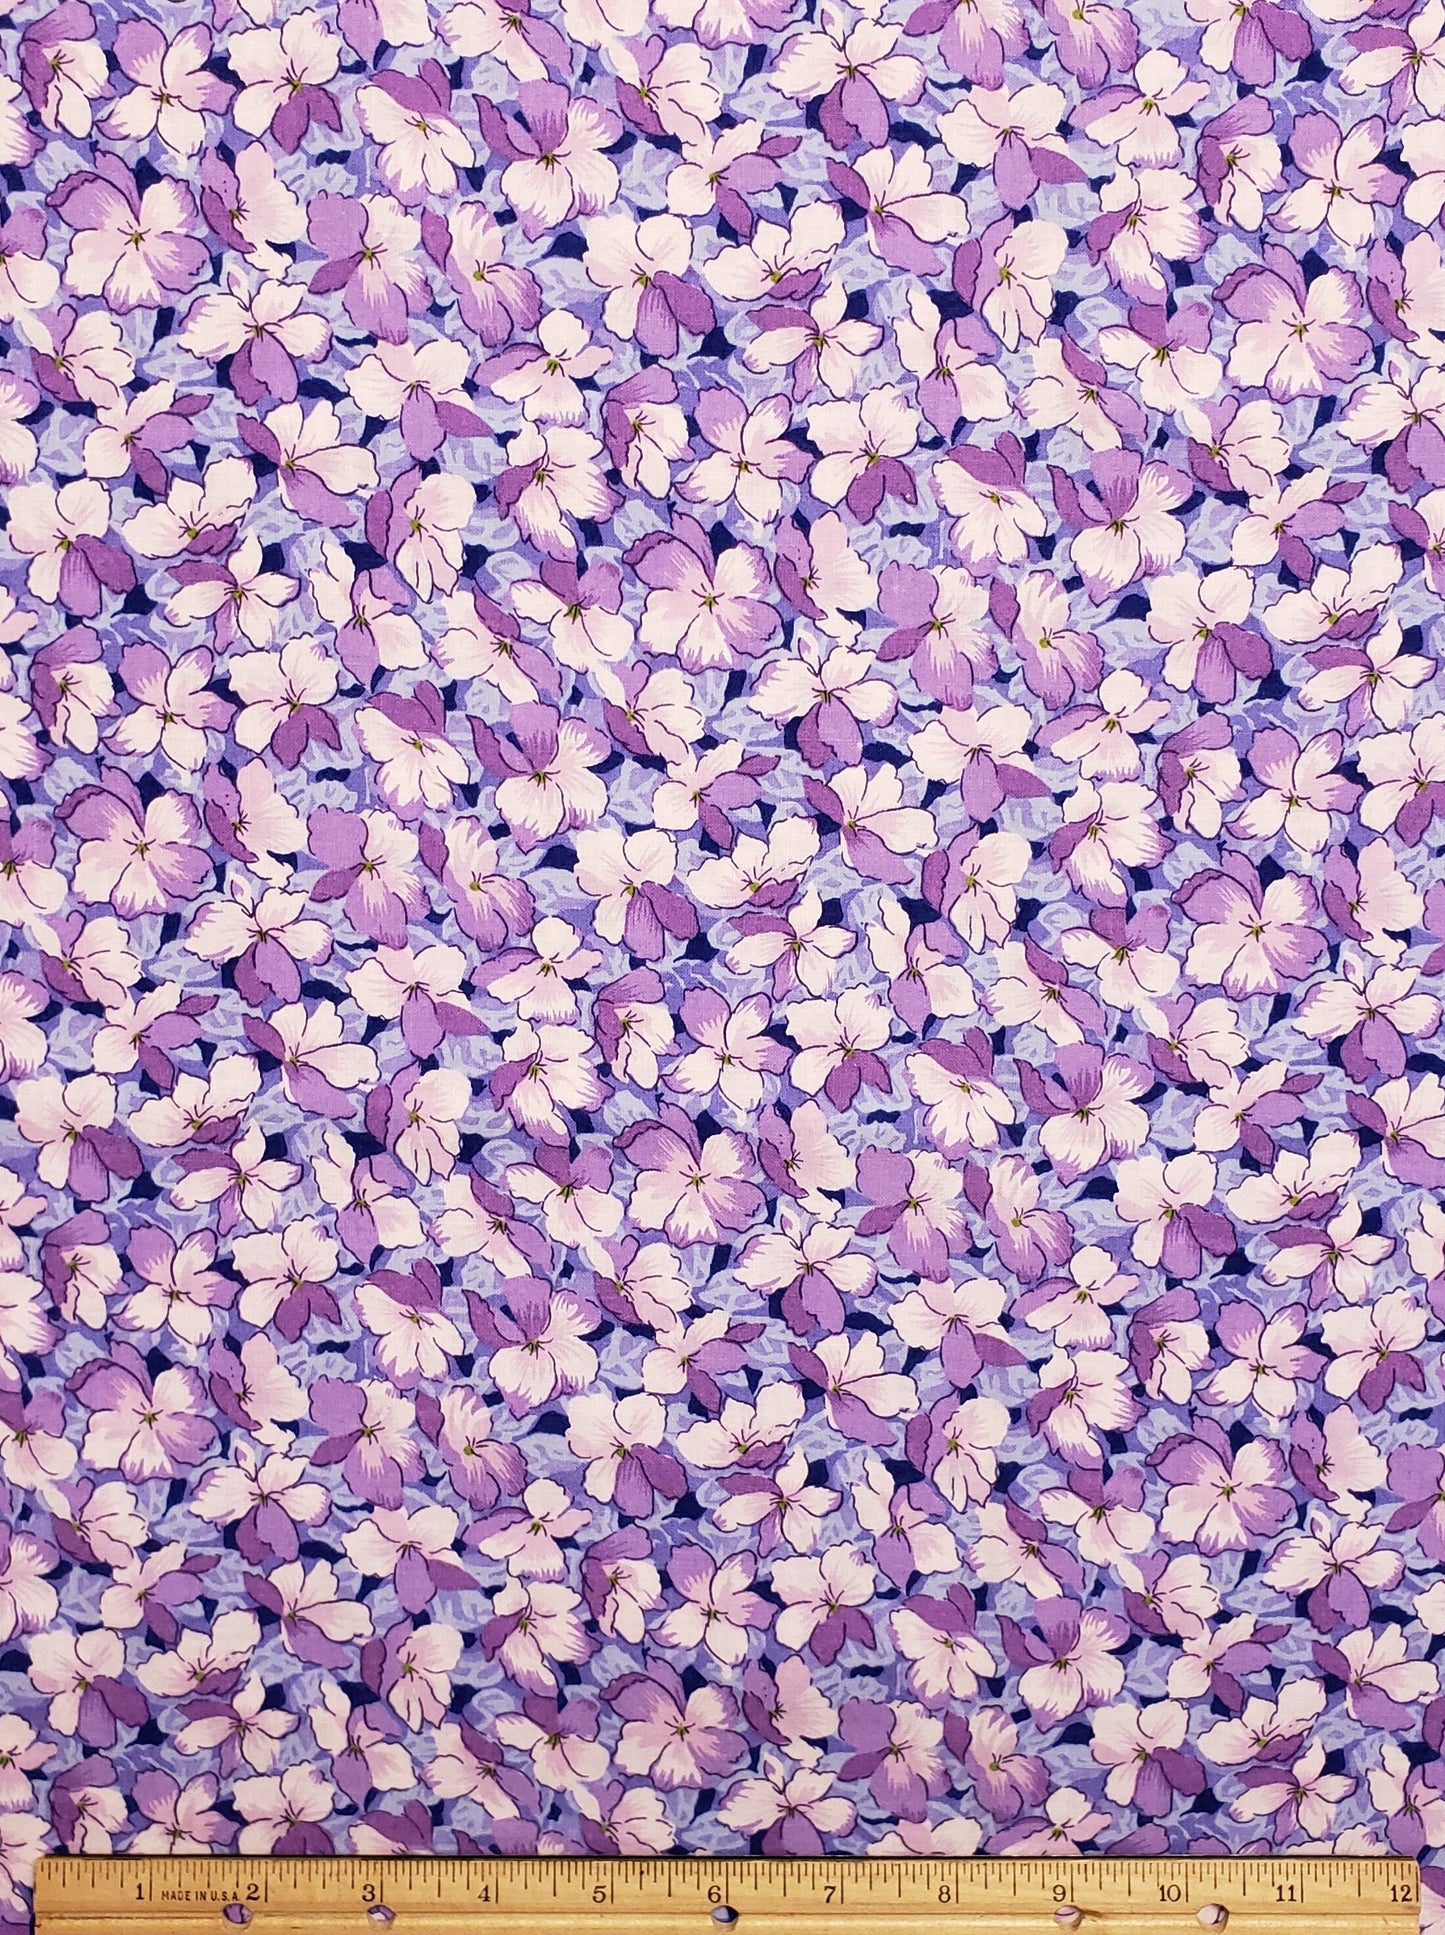 Floral Print Fabric in Tones of Purple and Lavender